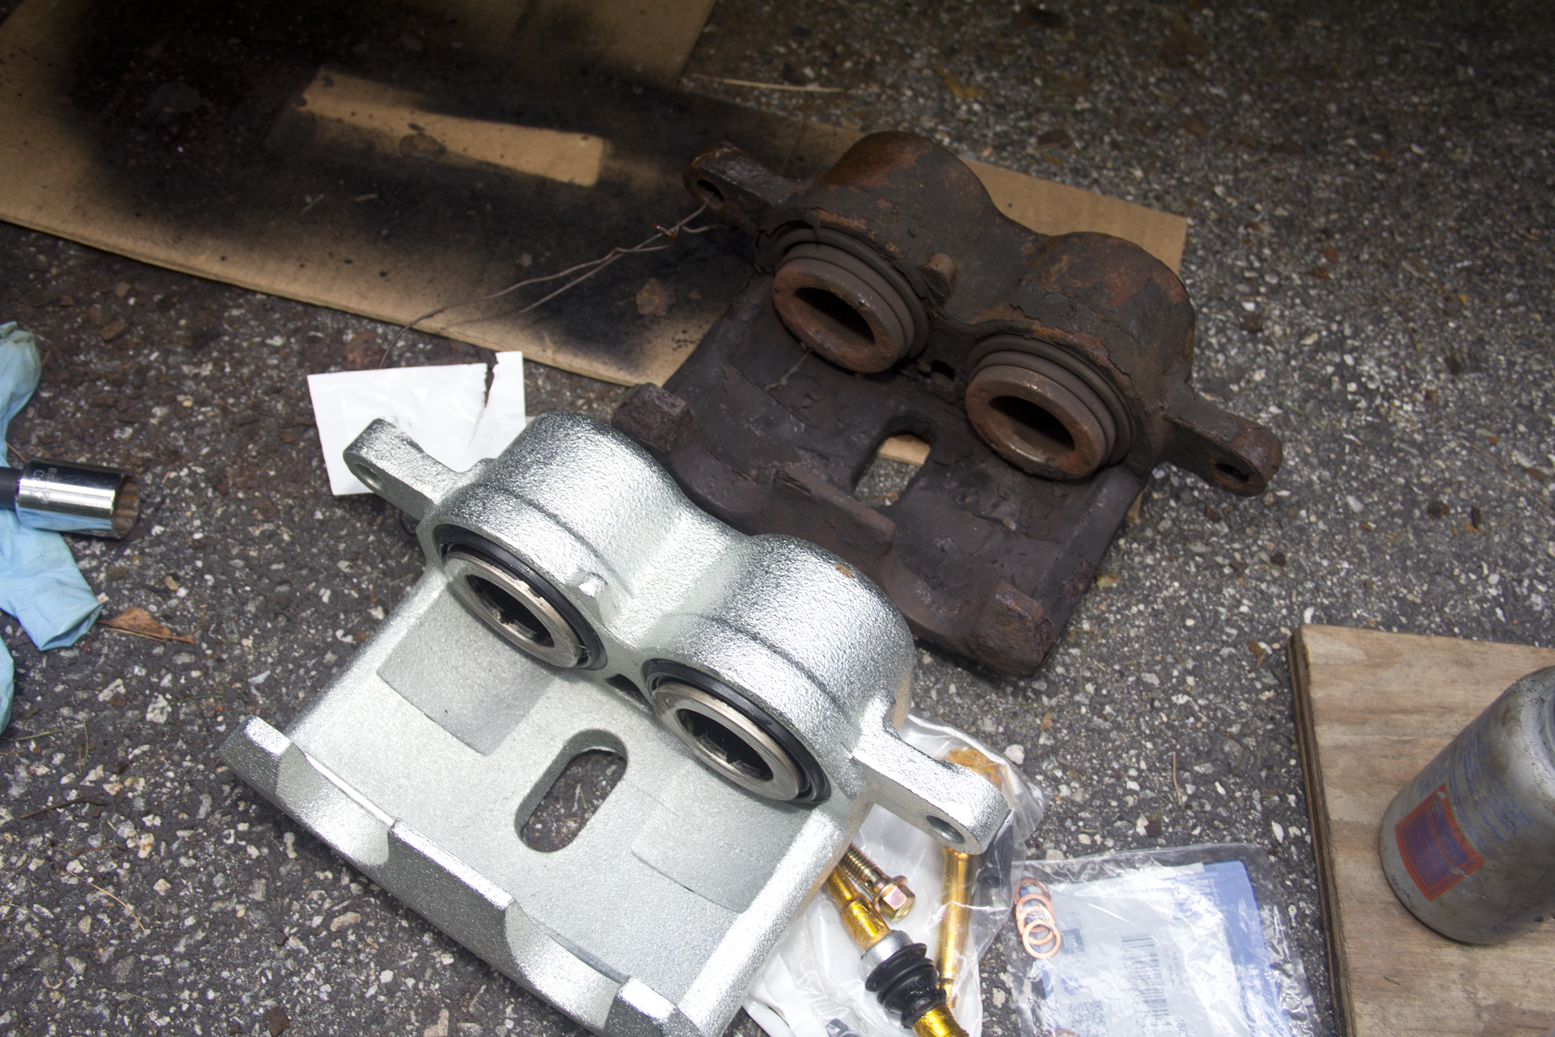 Calipers before and after.